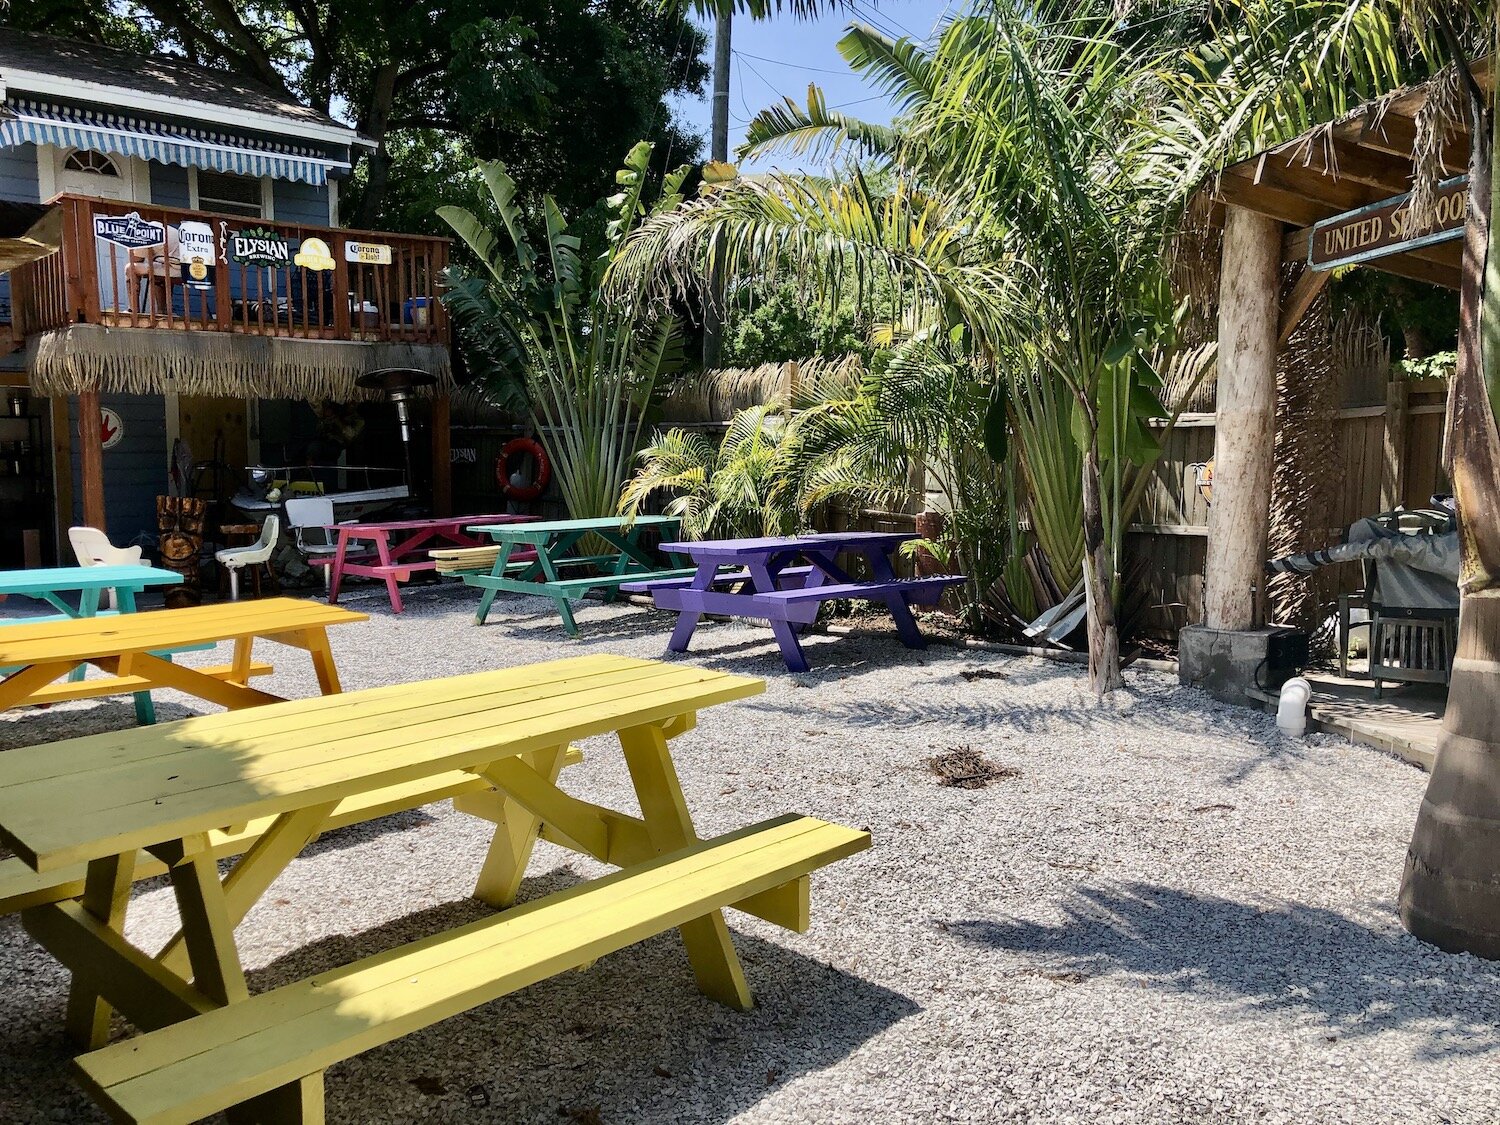 The restaurant’s expansive backyard has a full bar, picnic benches, a tiki hut, high-top table seating, and a small stage for live music